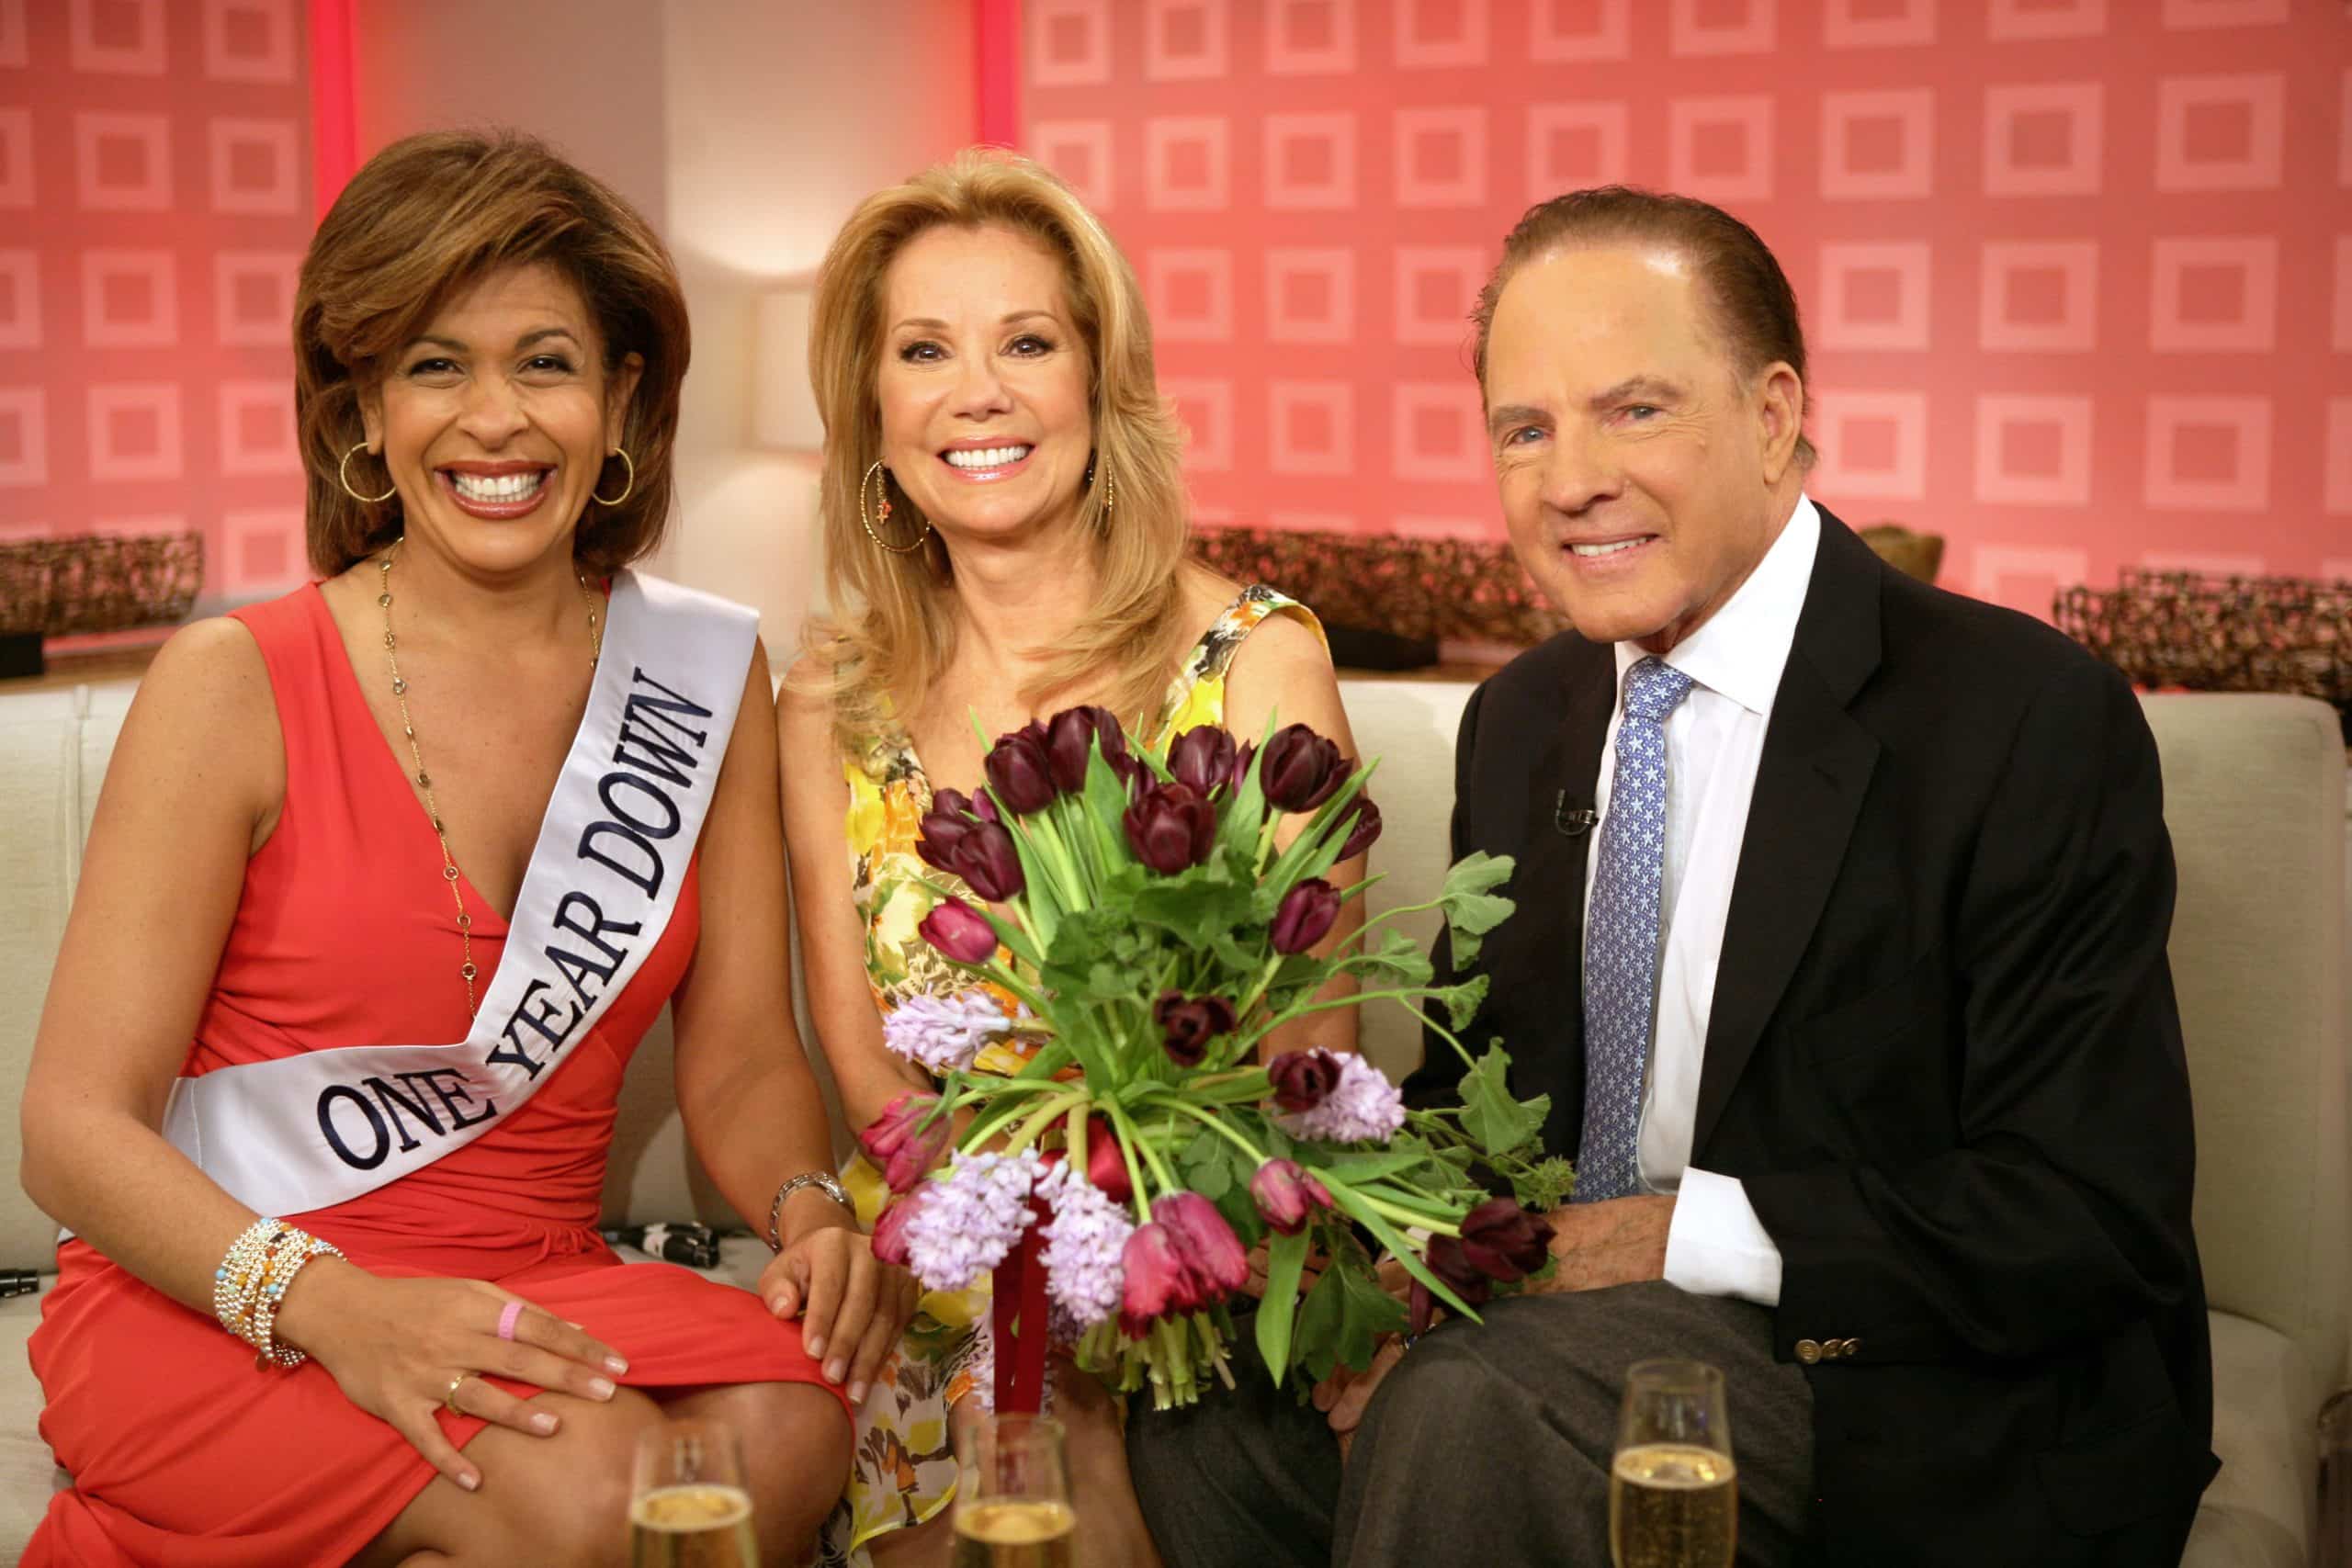 THE TODAY SHOW, (from left): Hoda Kotb, Kathie Lee Gifford, Frank Gifford, (aired April 7, 2009), 1952-. photo: Jessica Miglio